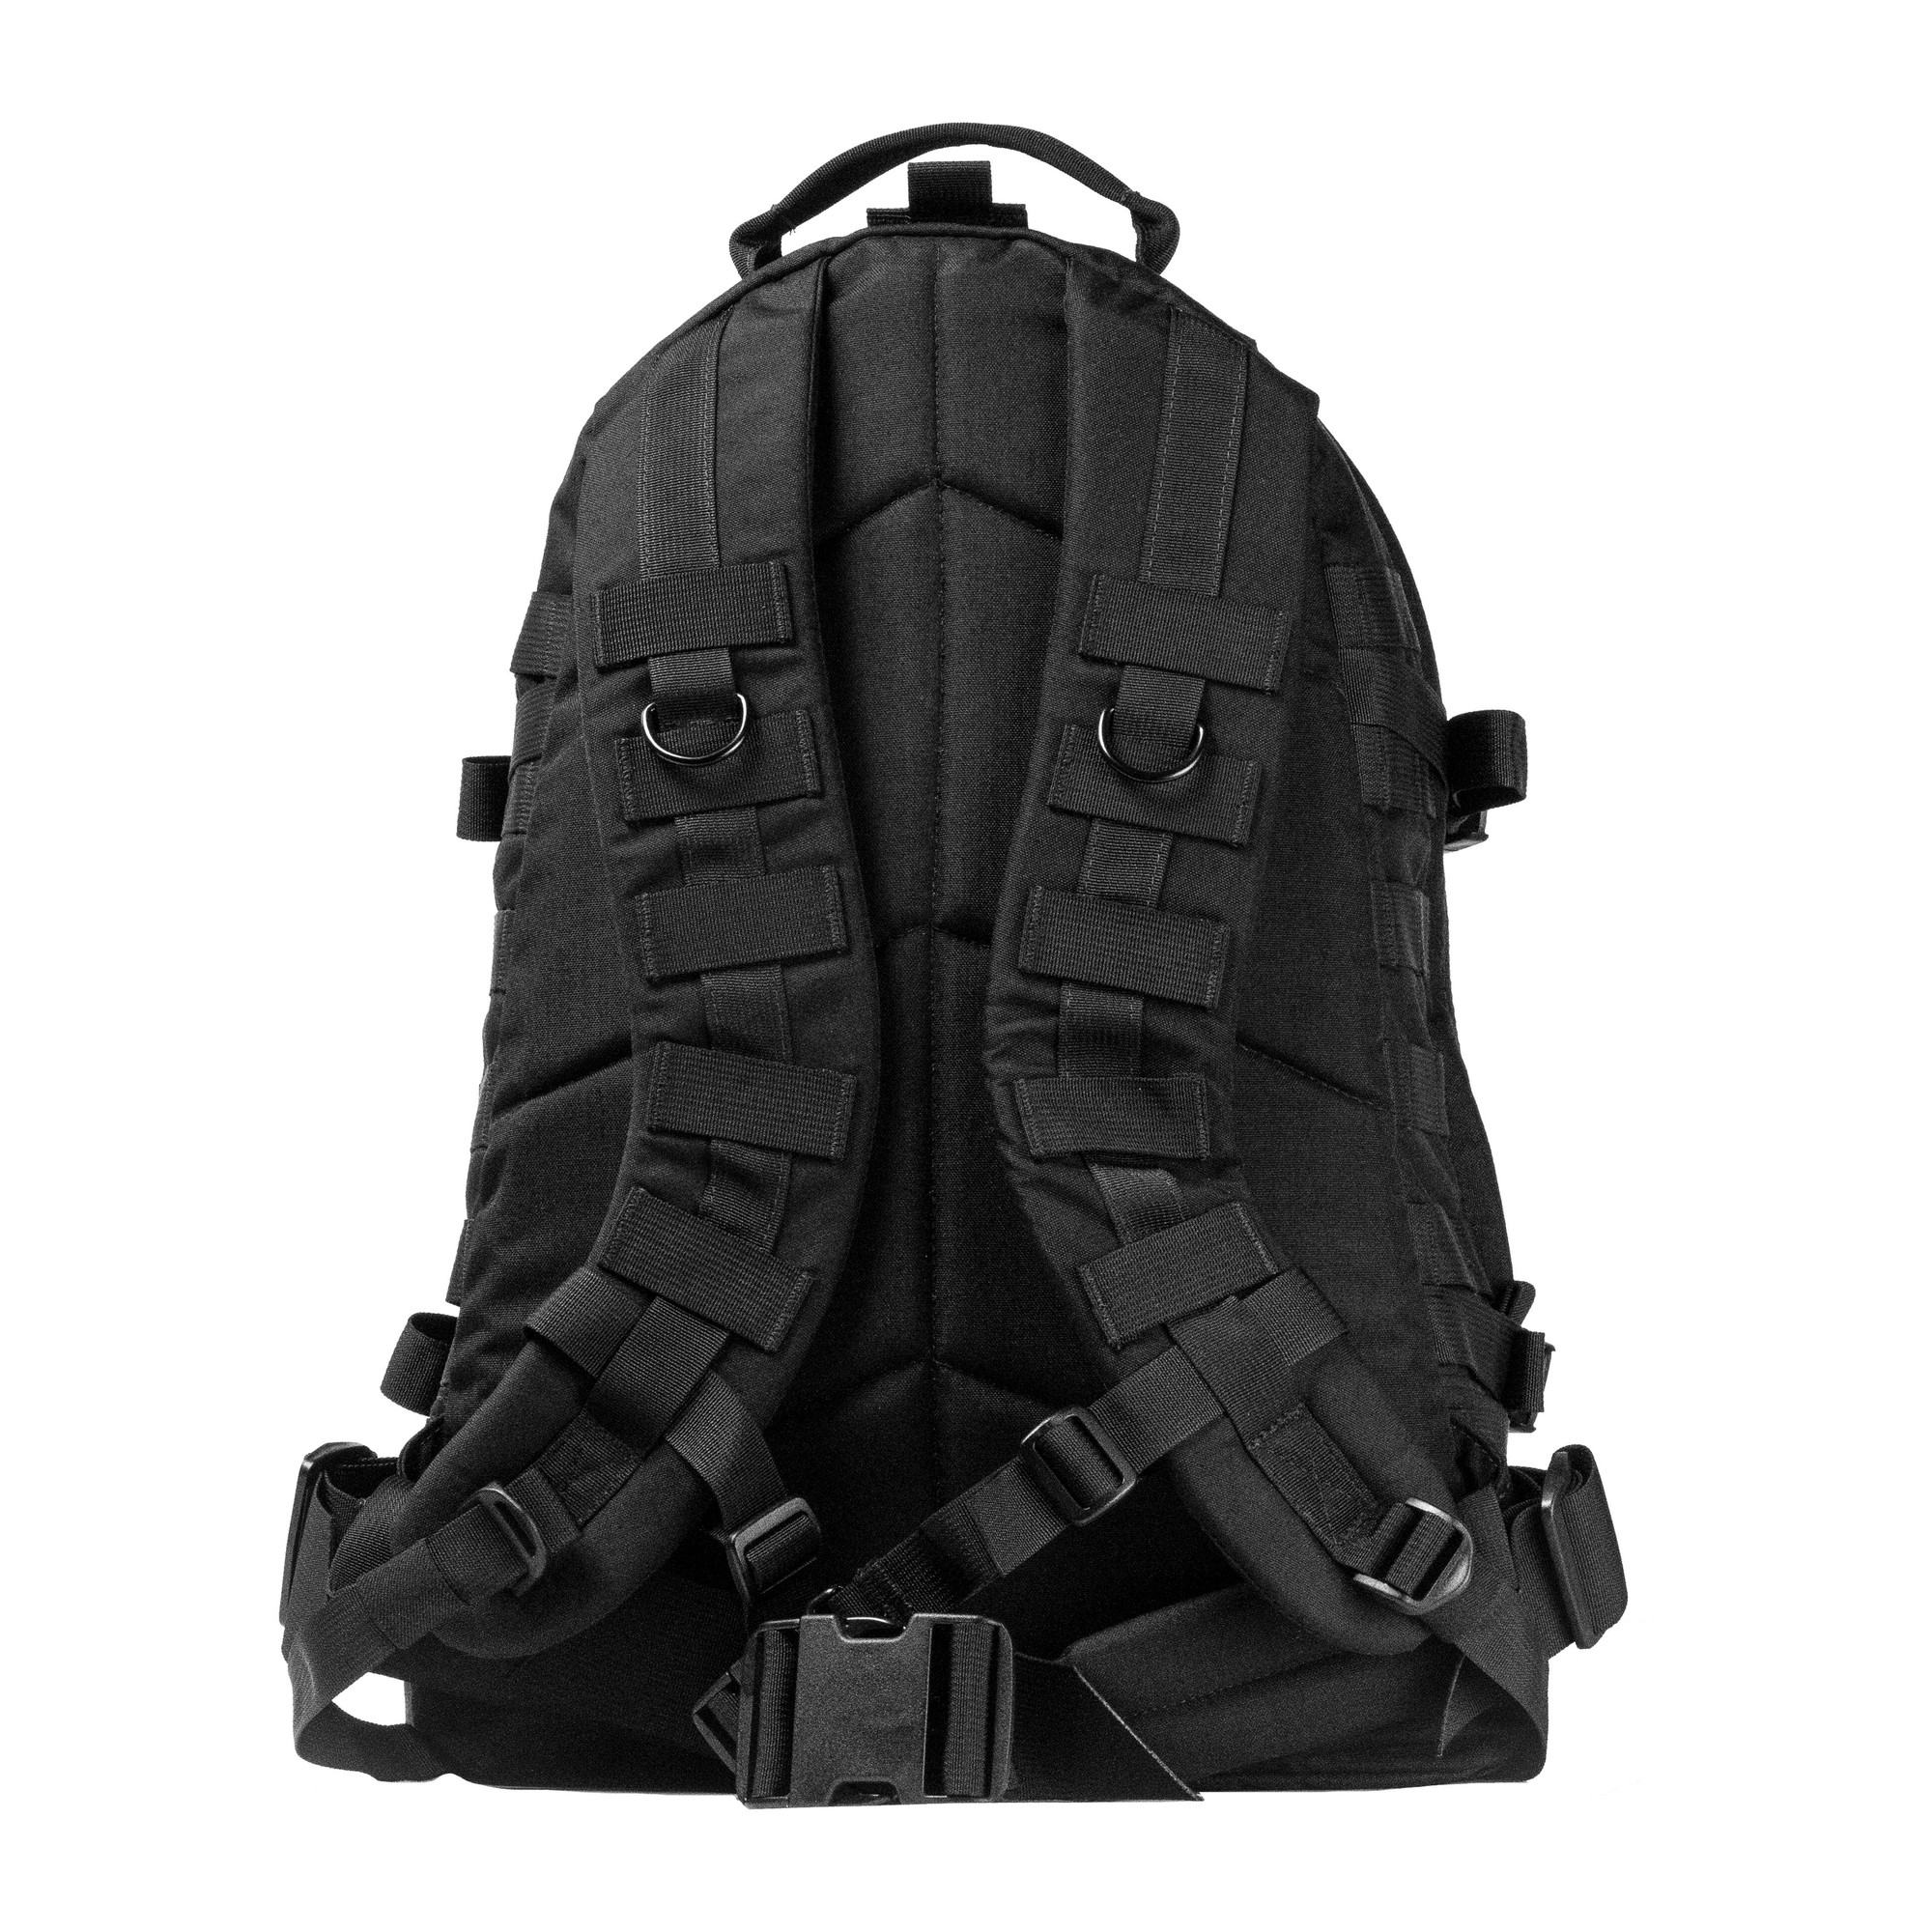 T3 3 Day Hydration Backpack - T3 Gear